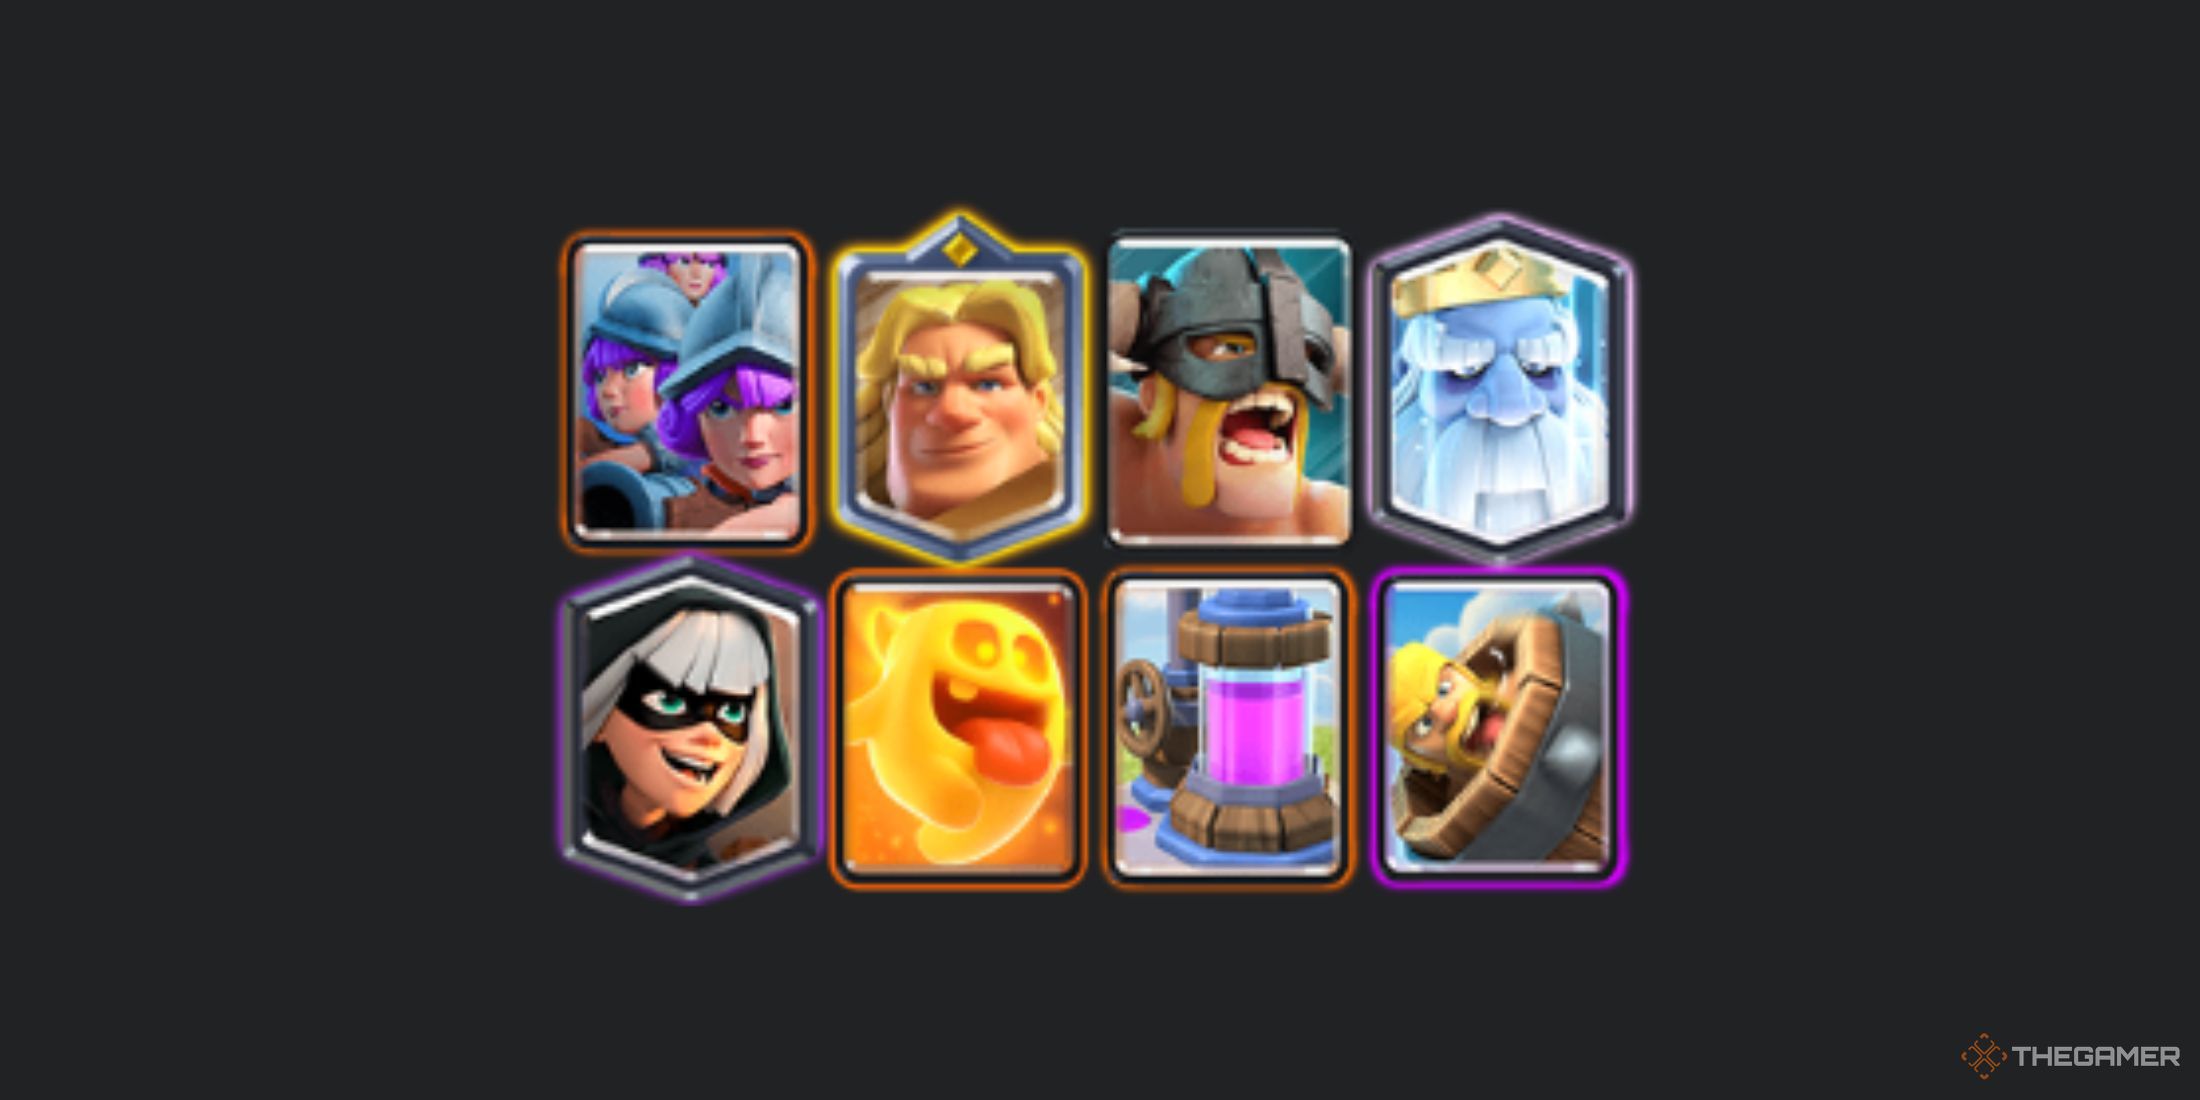 A deck in Clash Royale with Three Musketeer, Golden Knight, Elite Barbarians, Royal Ghost, Bandit, Heal Spirit, Elixir Collector and Barbarian Barrel.